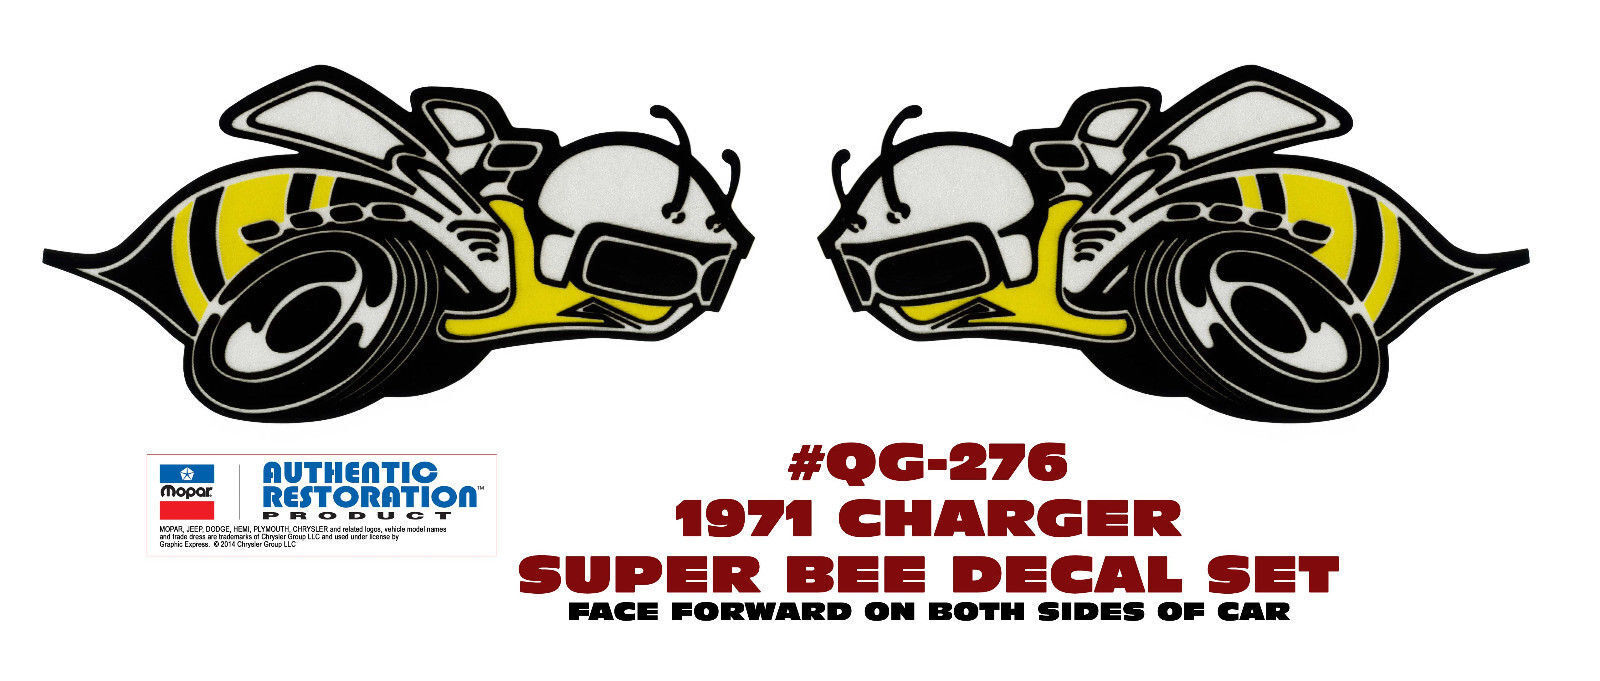 GE-QG-276 1971 DODGE CHARGER SUPER BEE - QUARTER PANEL BEE DECAL - LICENSED